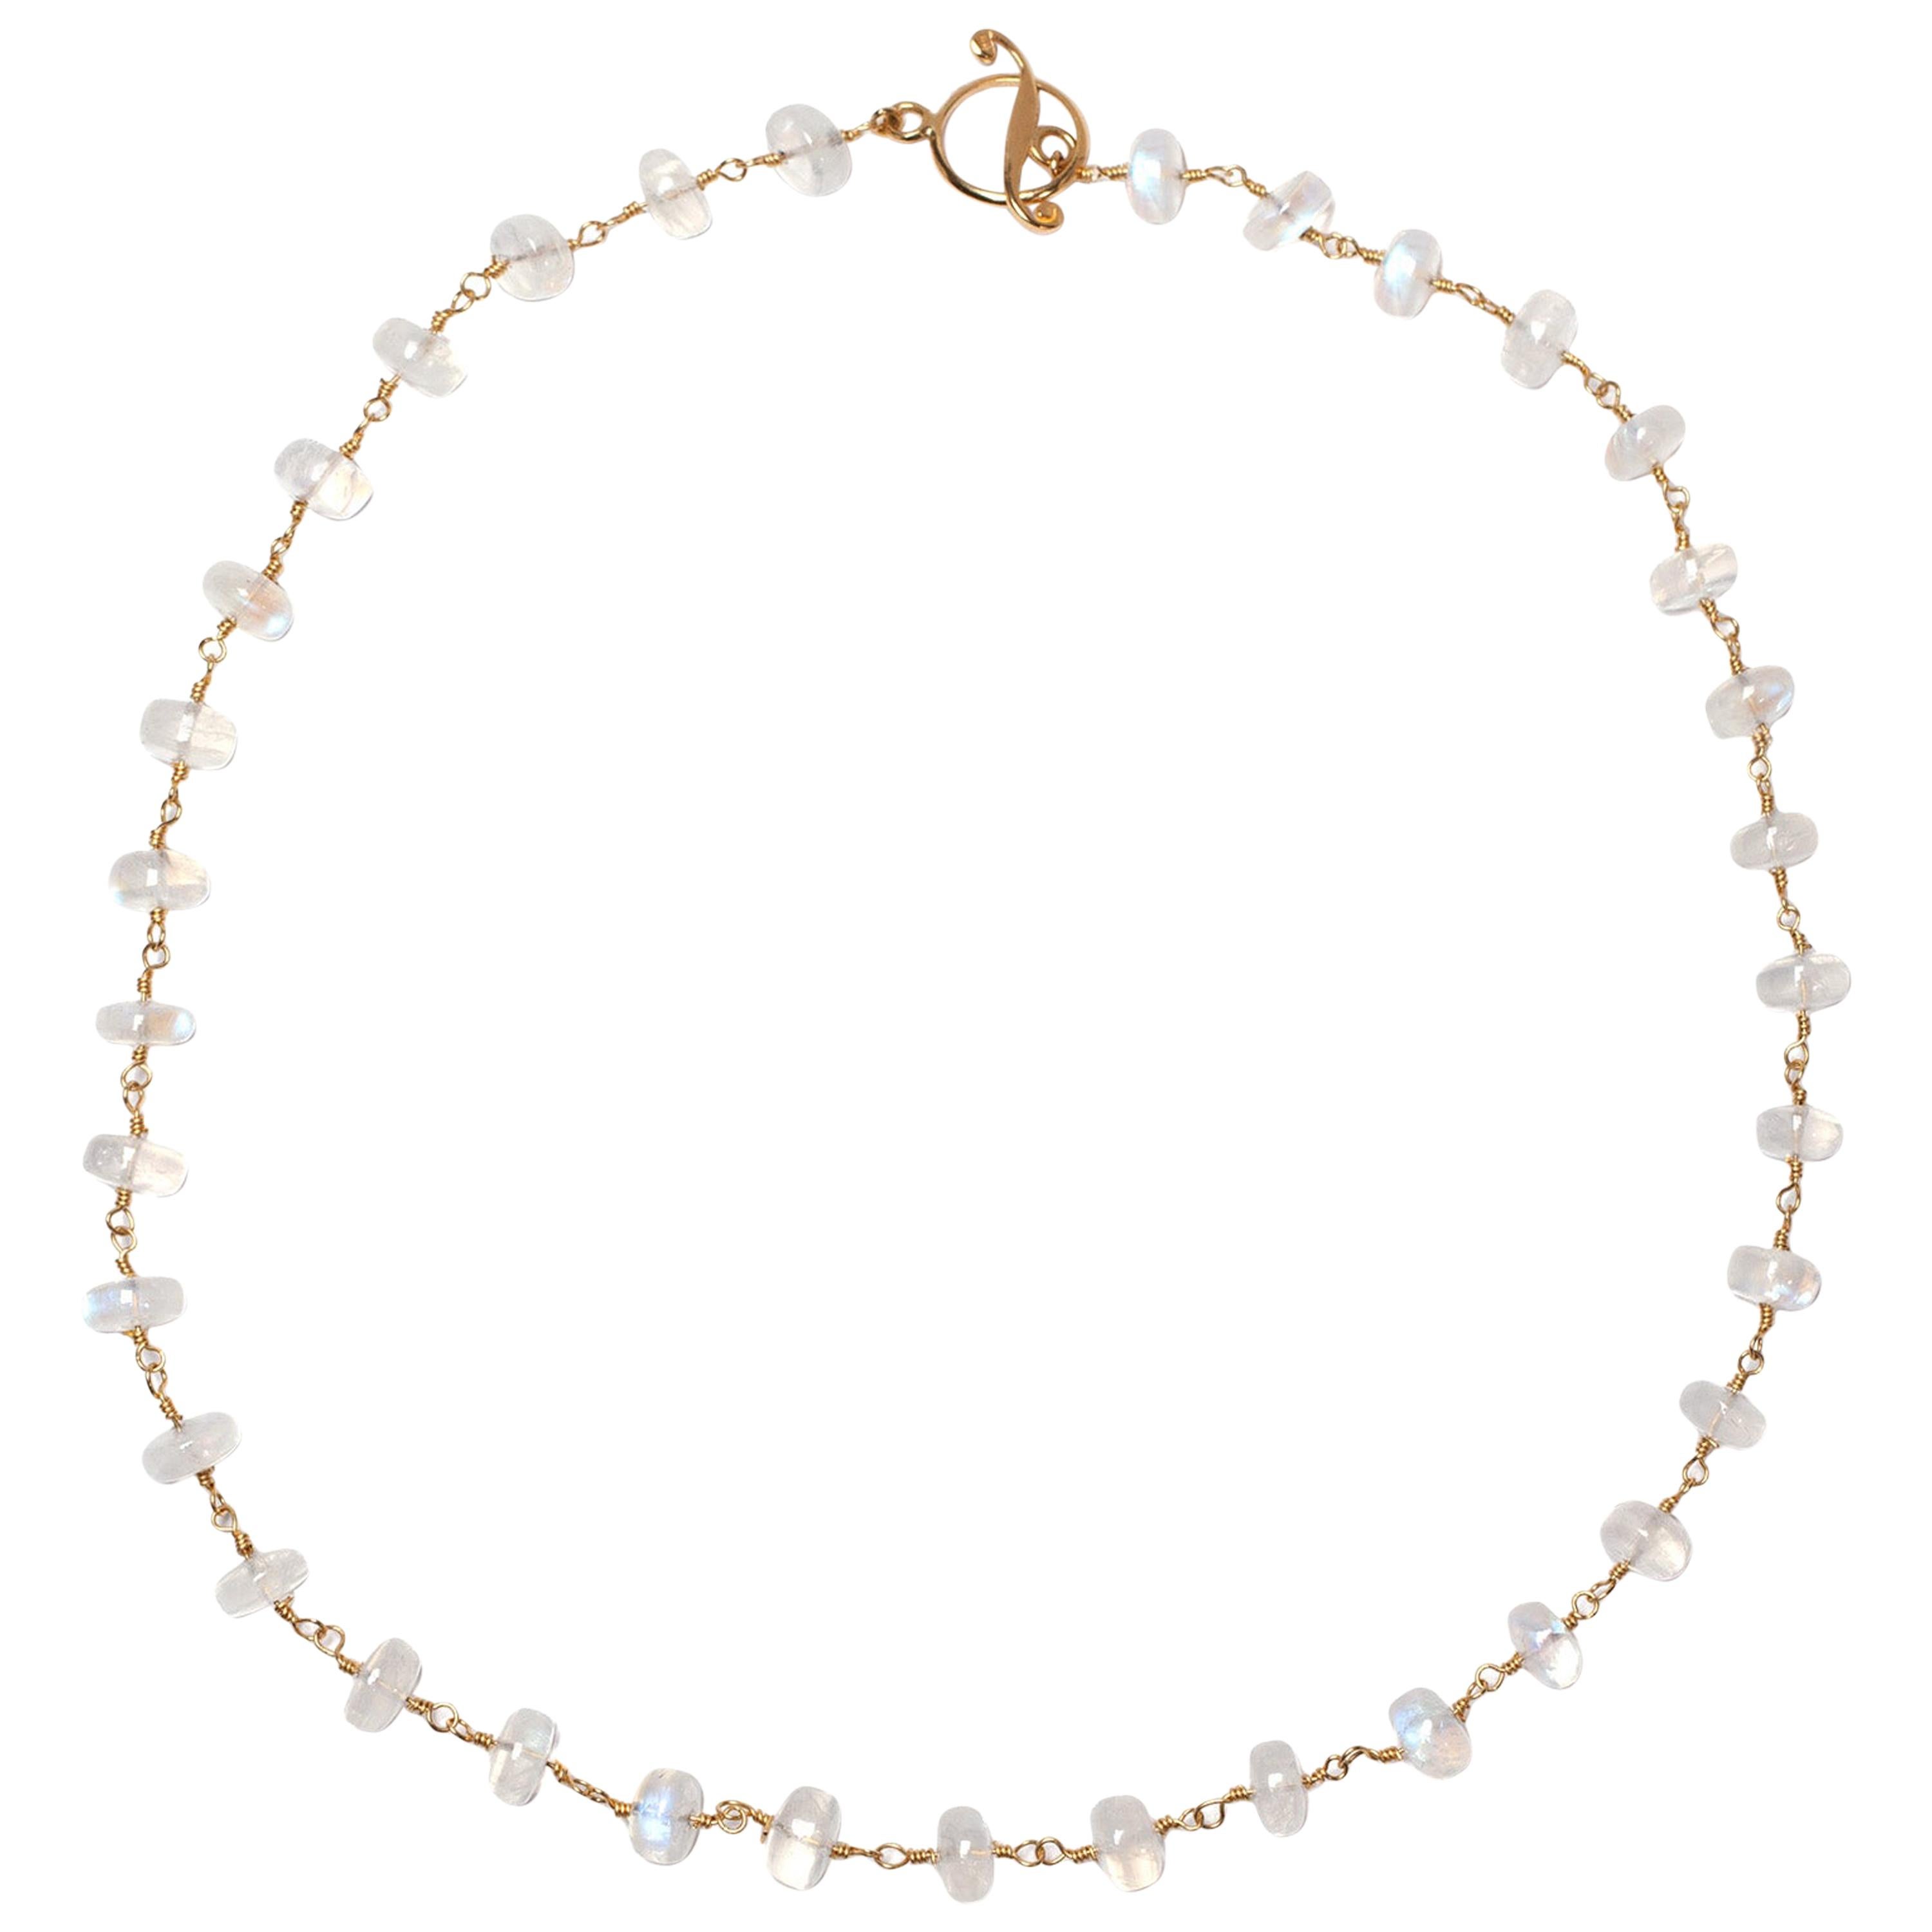 Rainbow Moonstone Rondelle Necklace in Gold For Sale